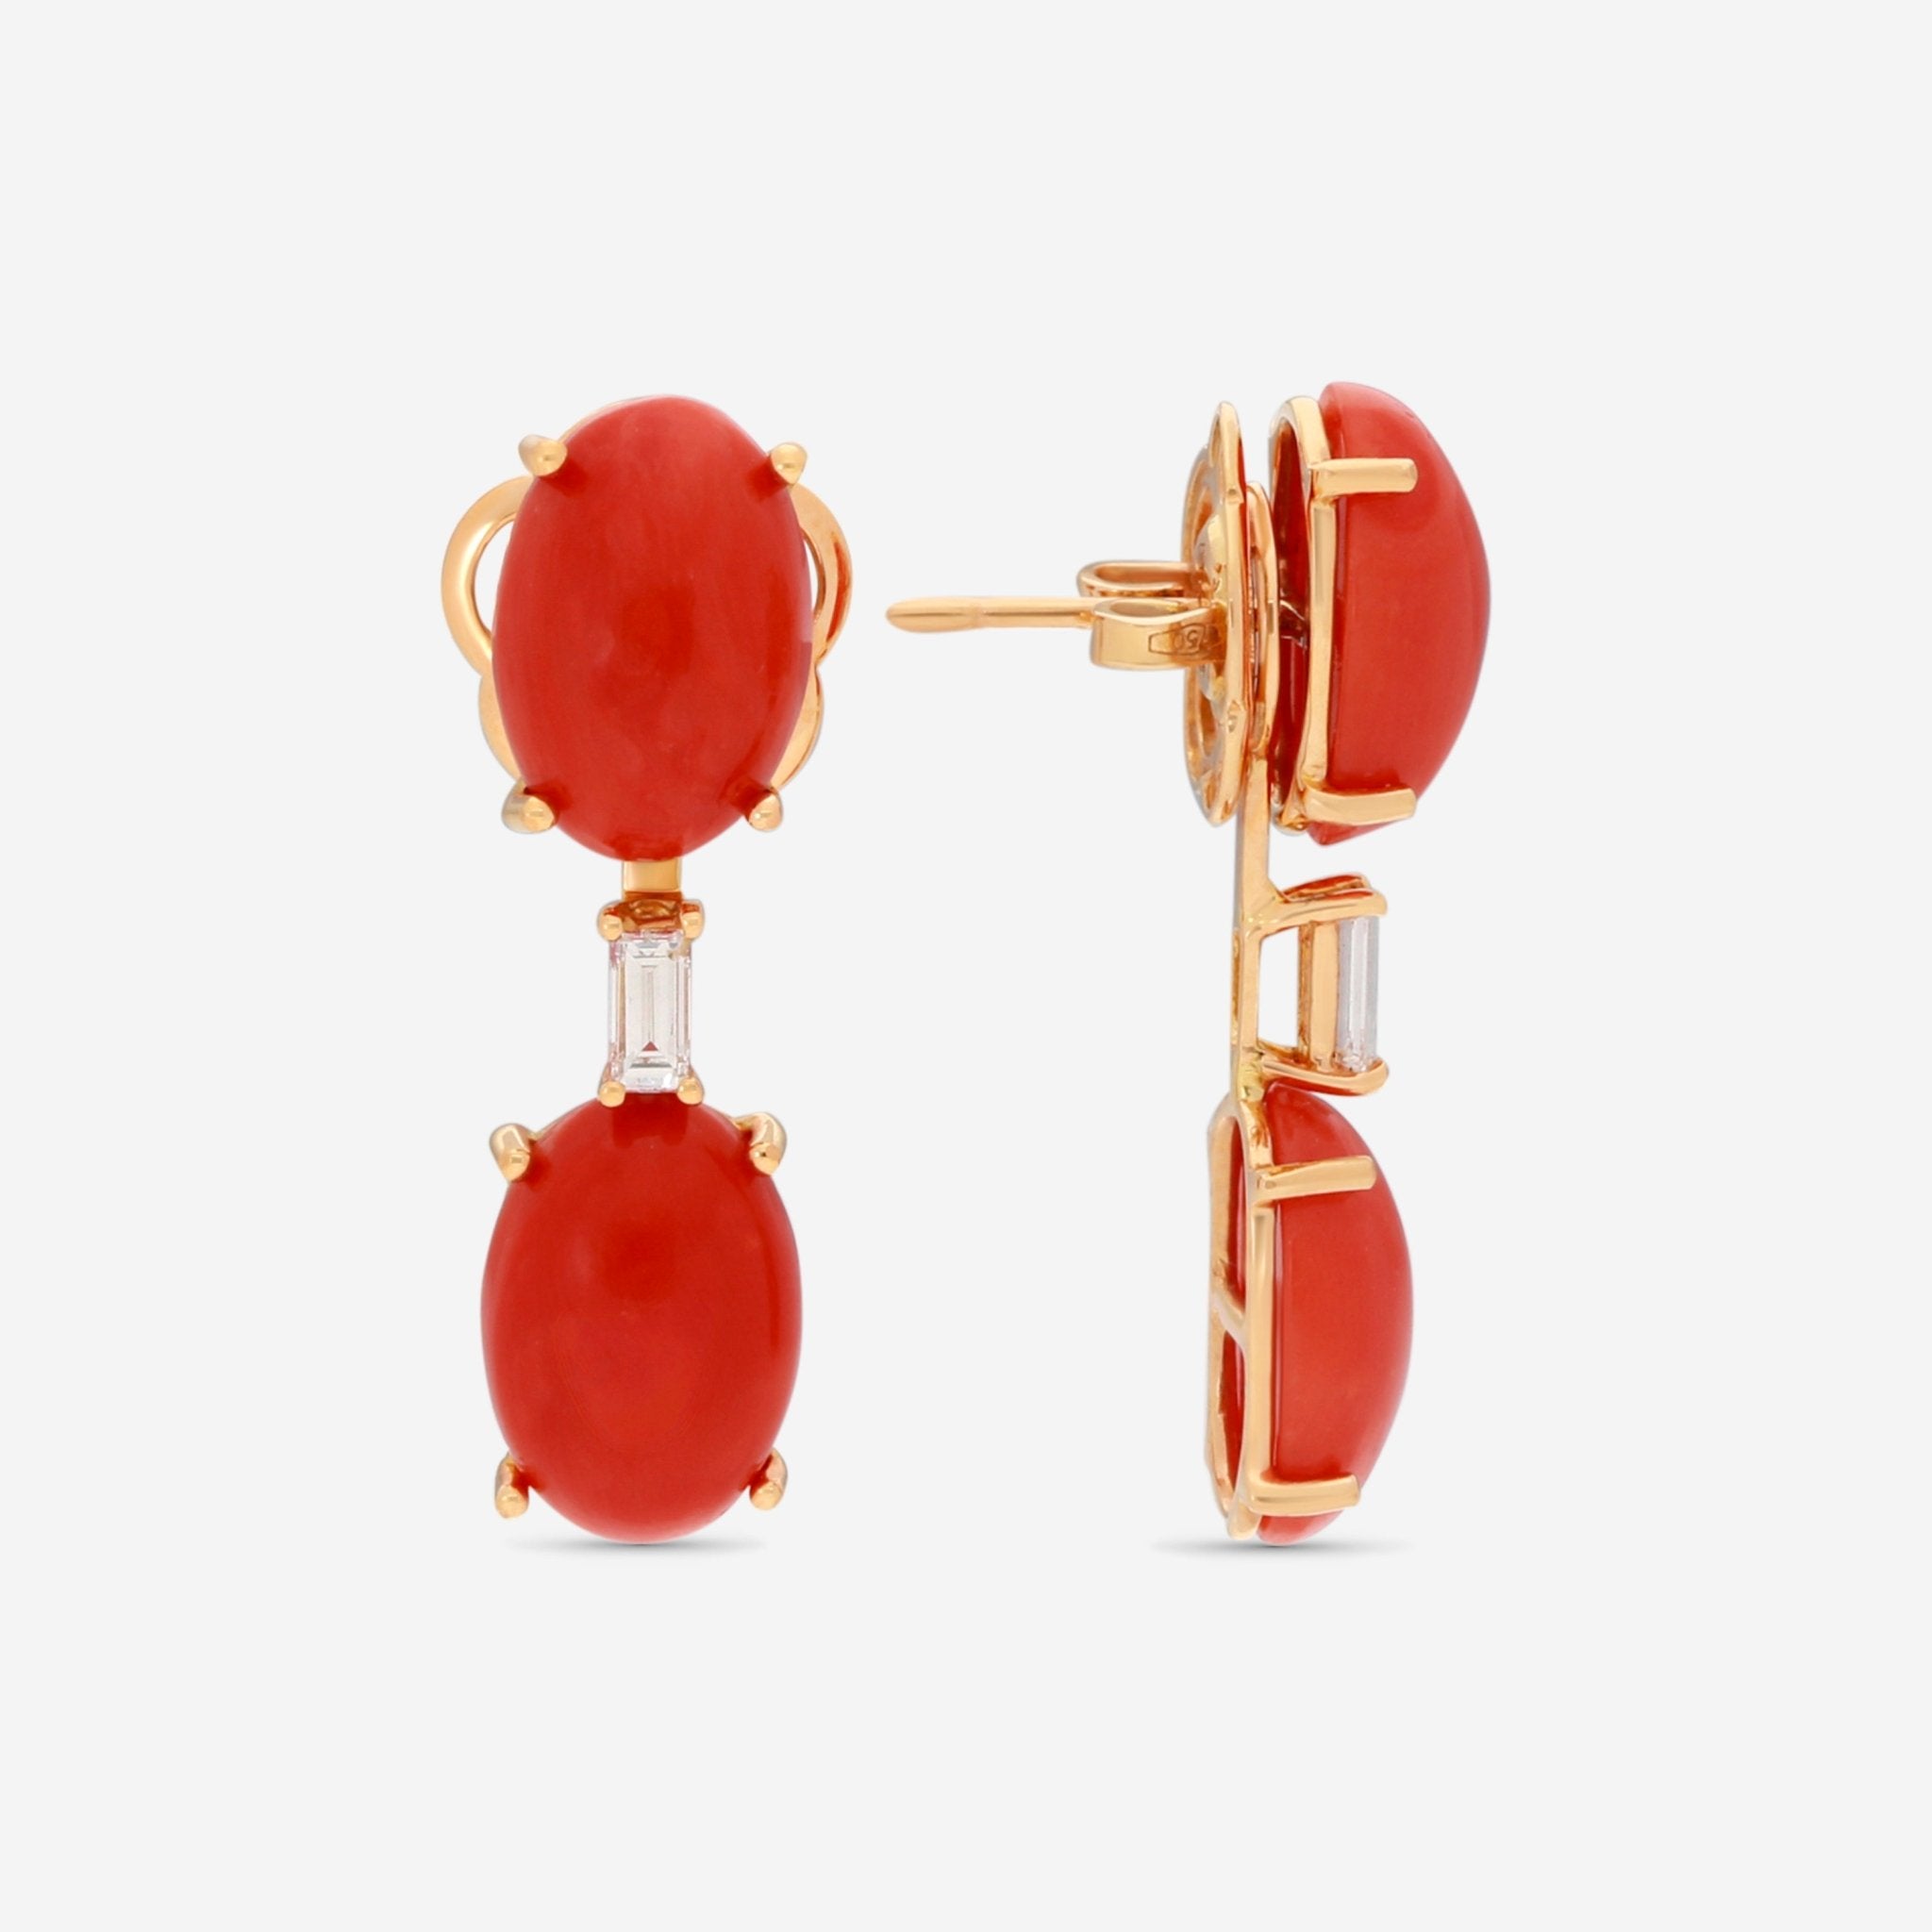 Zydo 18K Yellow Gold Diamond and Coral Earrings OL636 - THE SOLIST - Zydo